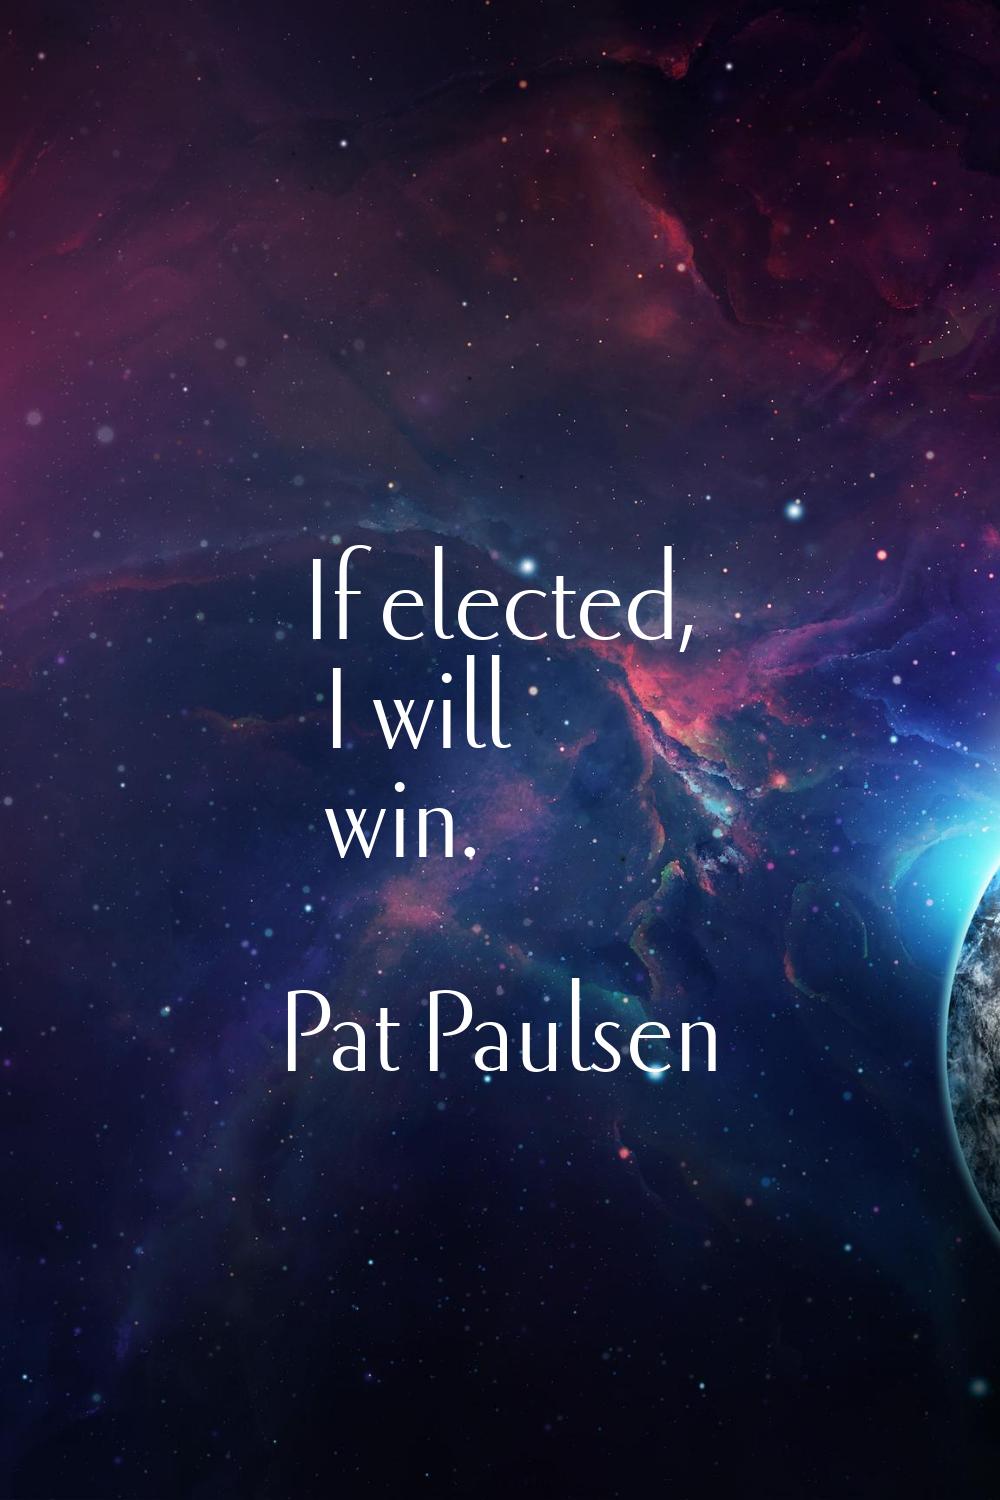 If elected, I will win.